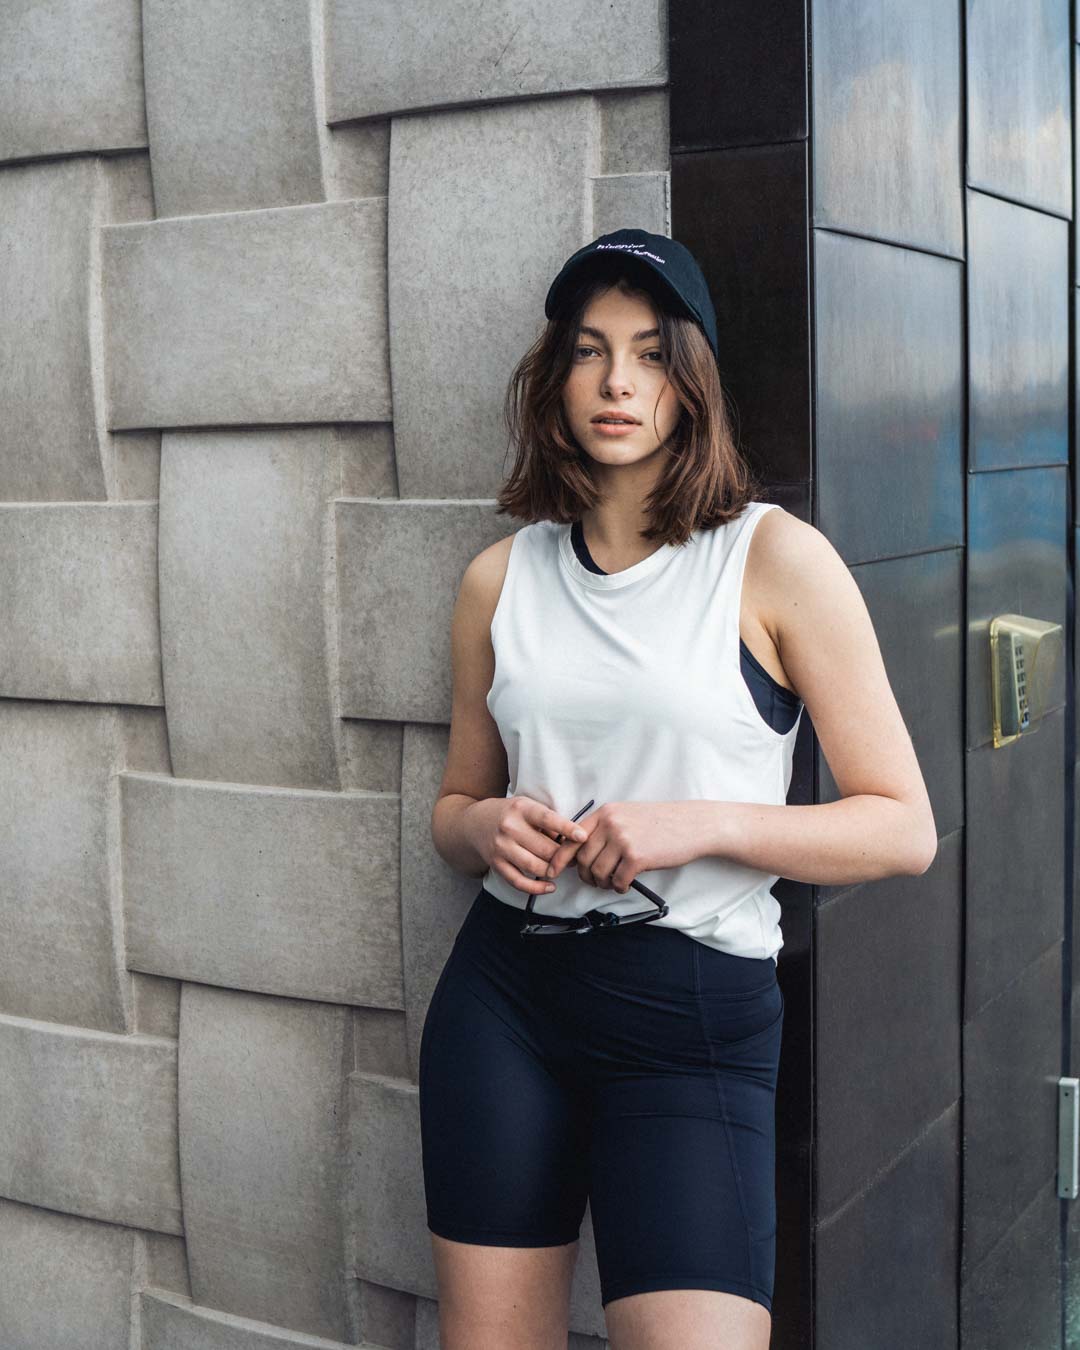 Woman in a black cap, white tank top and biker shorts leaning on a wall